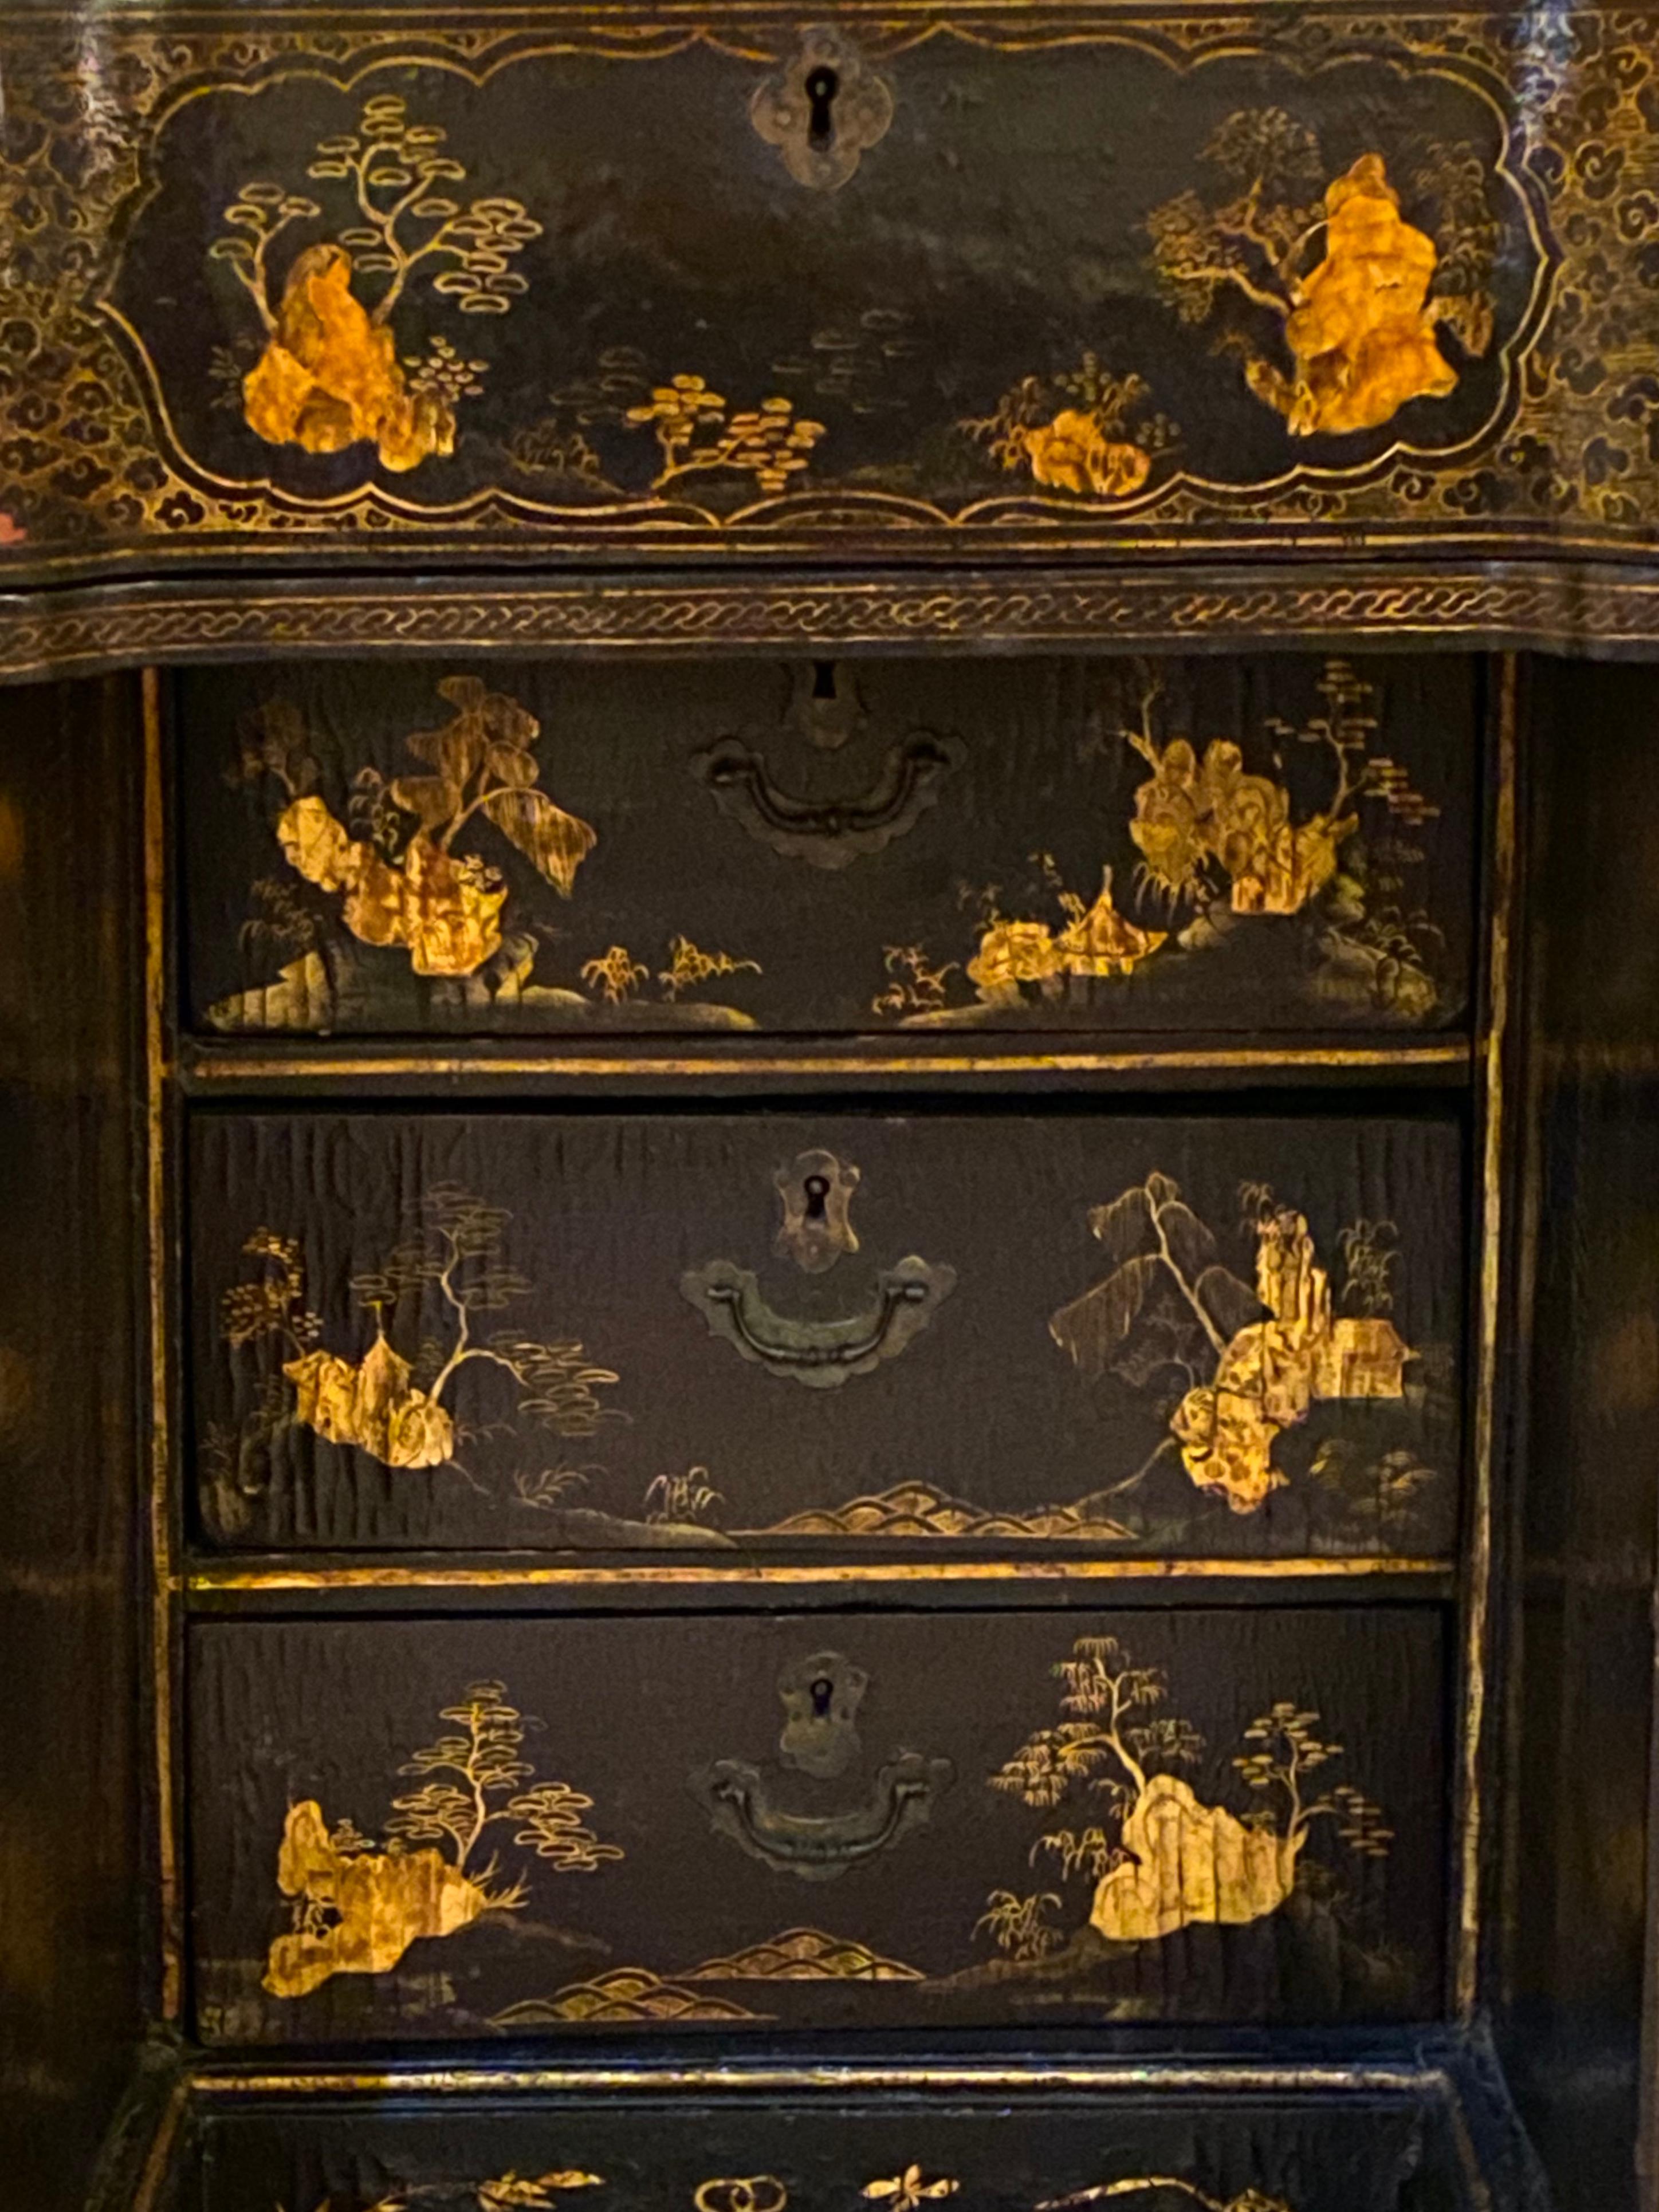 18th-19th Century Chinese Export Chinoiserie Lacquer Decorated Knee Hole Desk 9